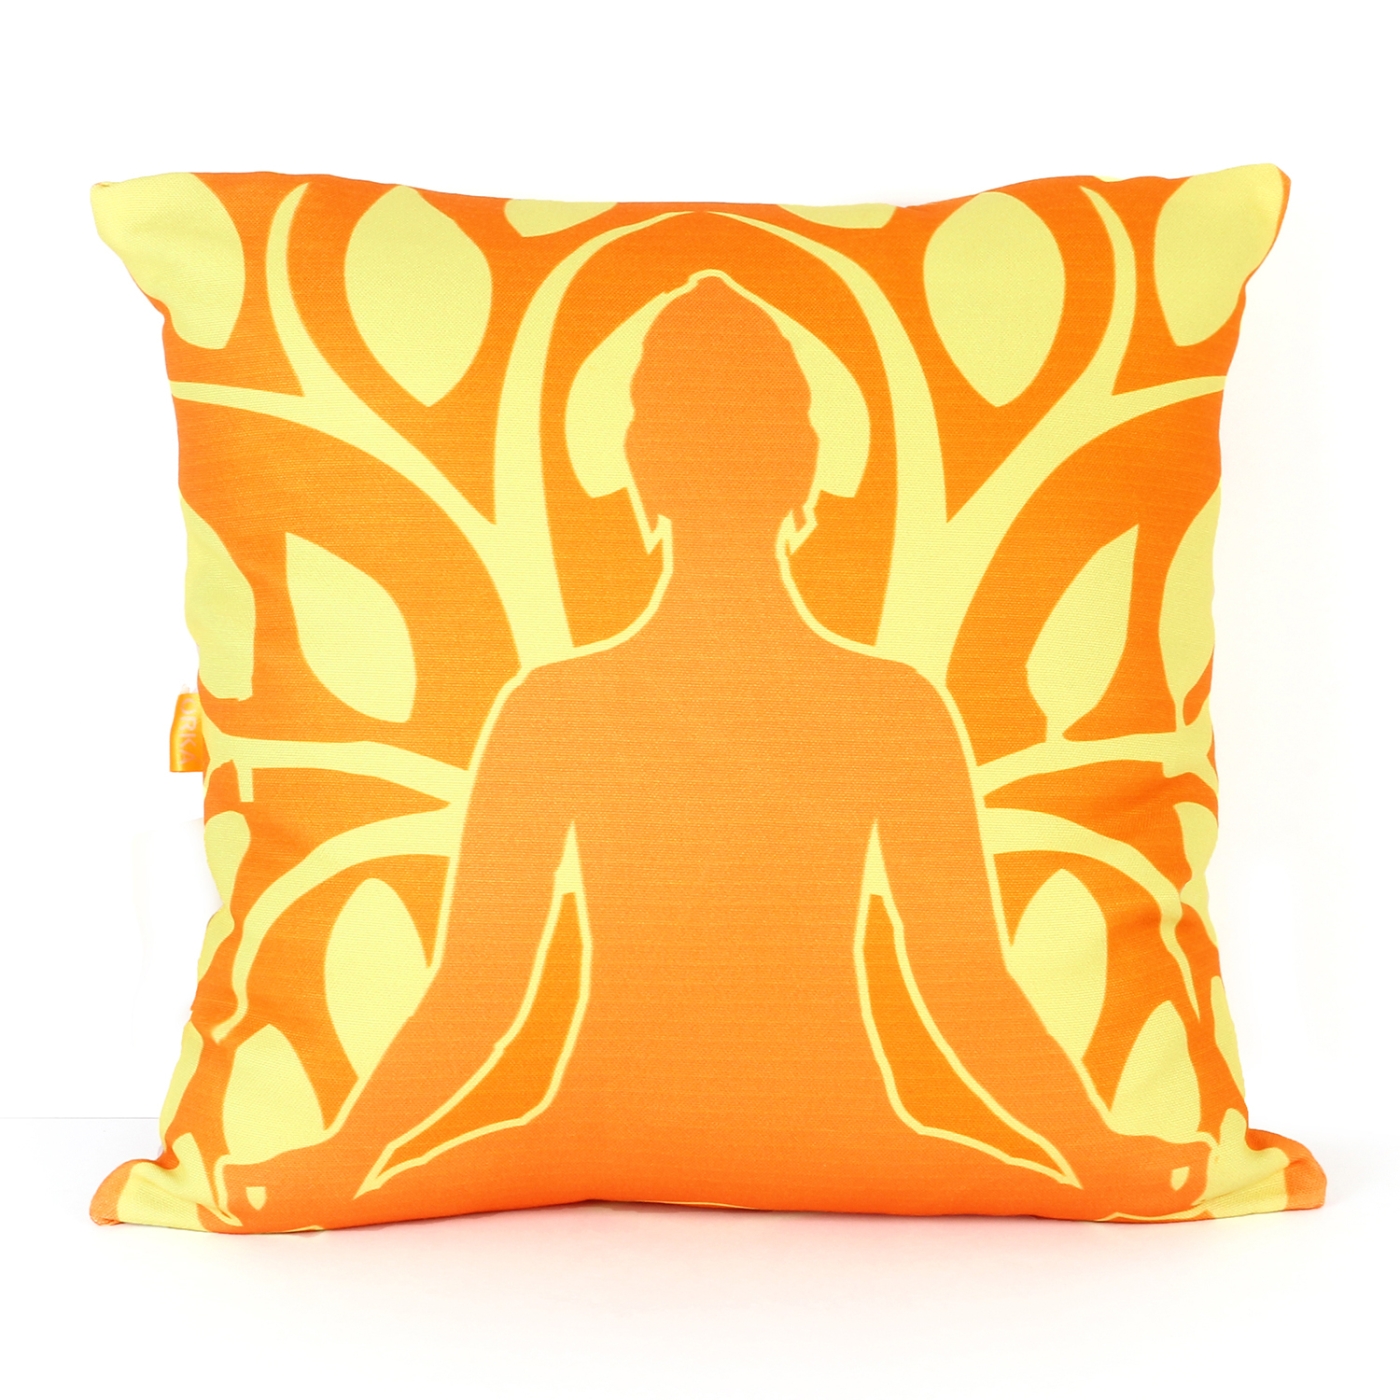 ORKA Digital Printed Canvas Filled With Polyfill Square Cushion 14 X 14 Inch (Orange, Yellow)  